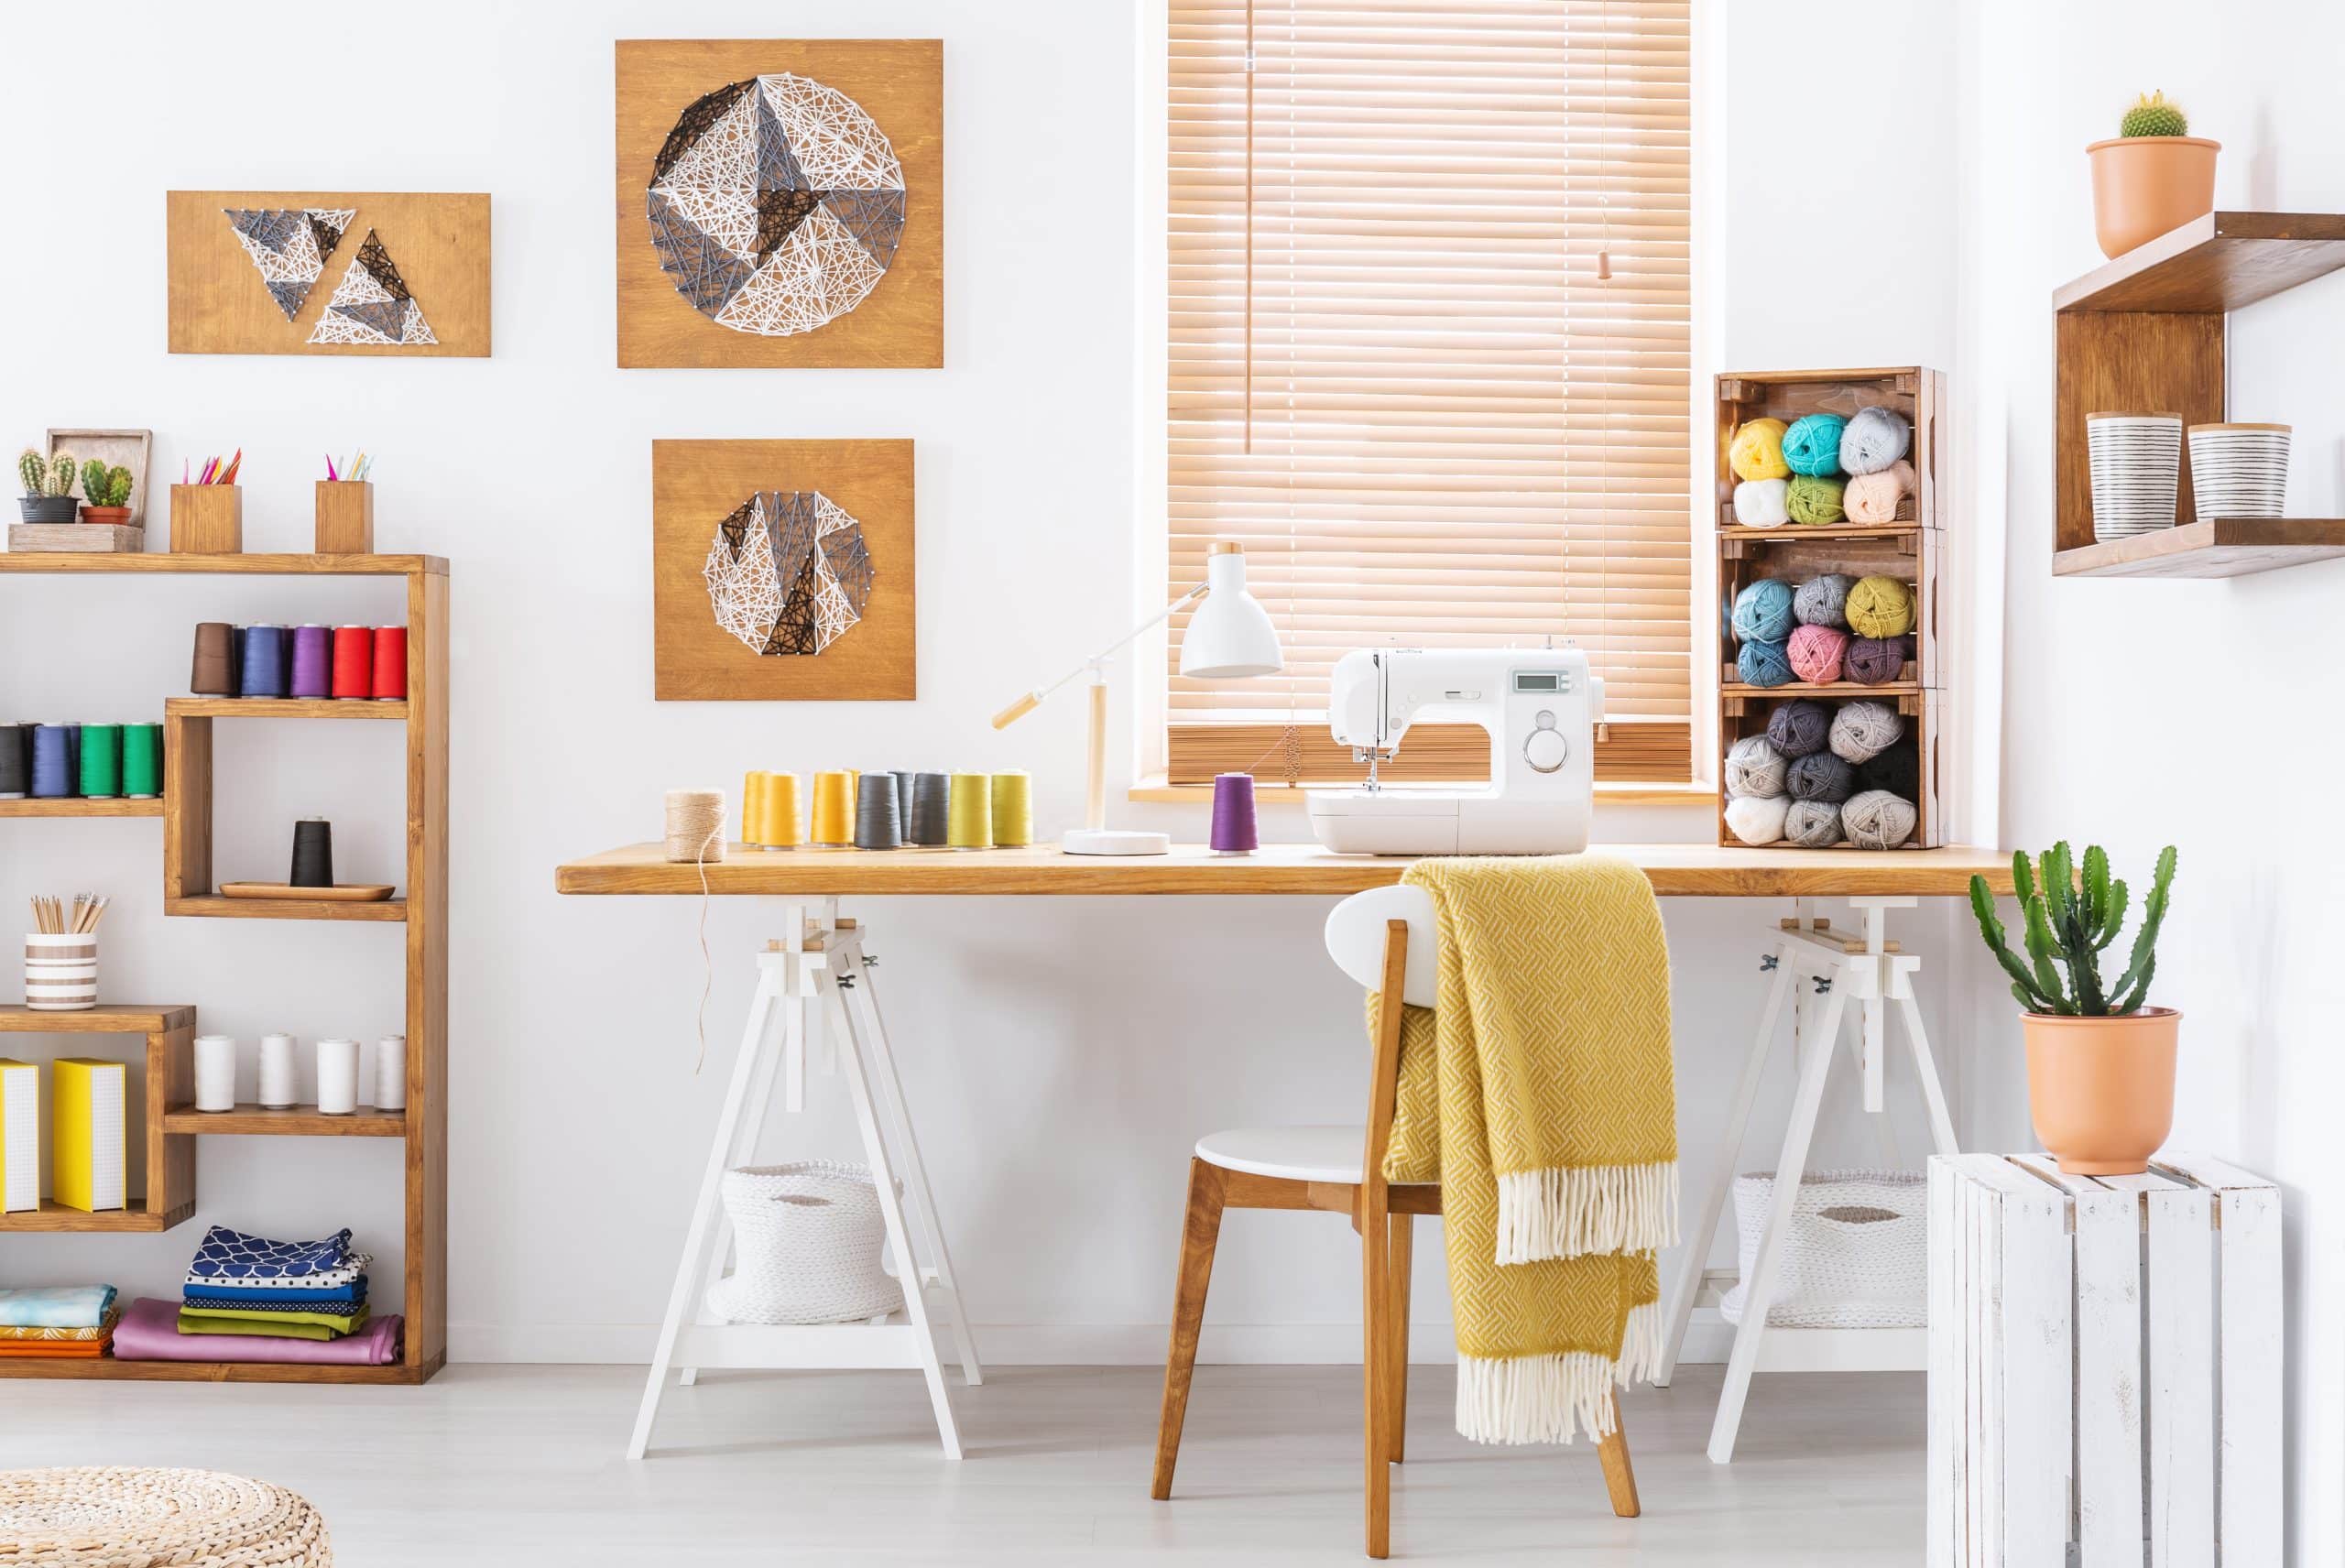 Storage units Bicester - image shows a hobby room with a desk against a wall with a window, a yellow blanket draped over the chair and shelves with wool, a sewing machine and threads on the desk and paintings on the wall